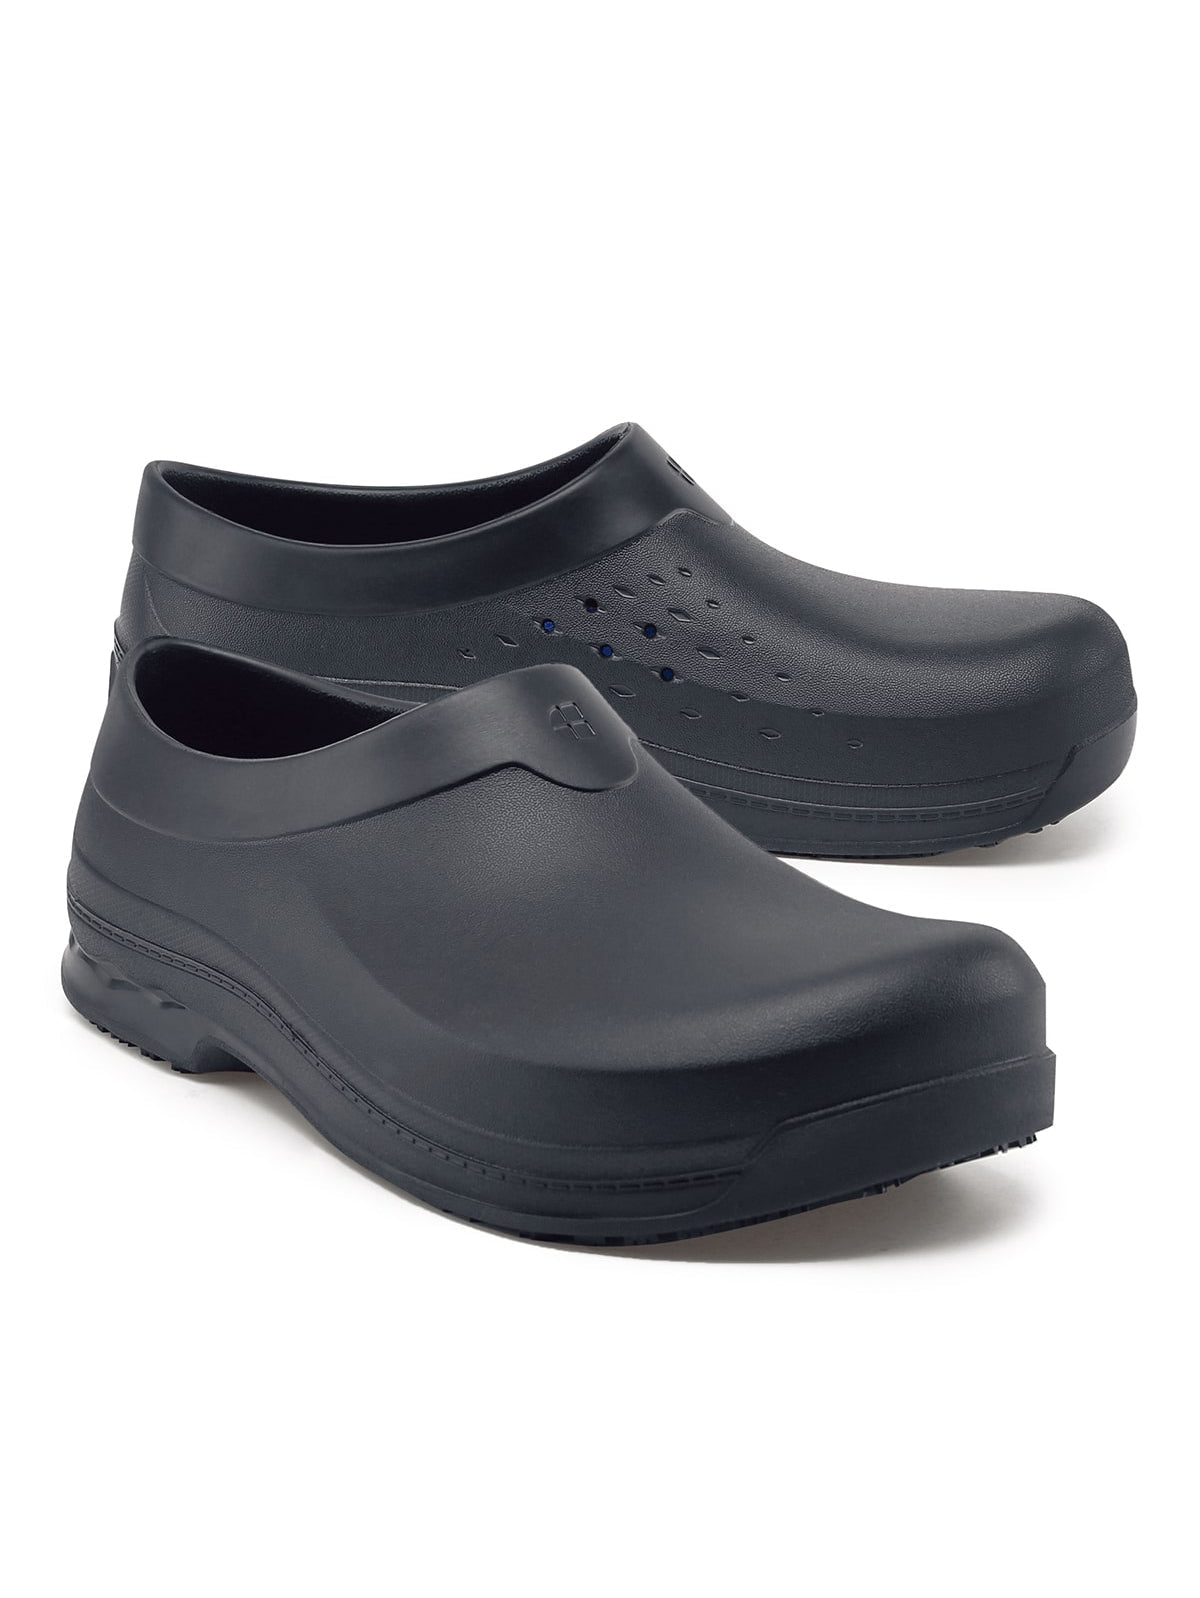 Unisex Work Shoe Radium by Shoes For Crews -  ChefsCotton